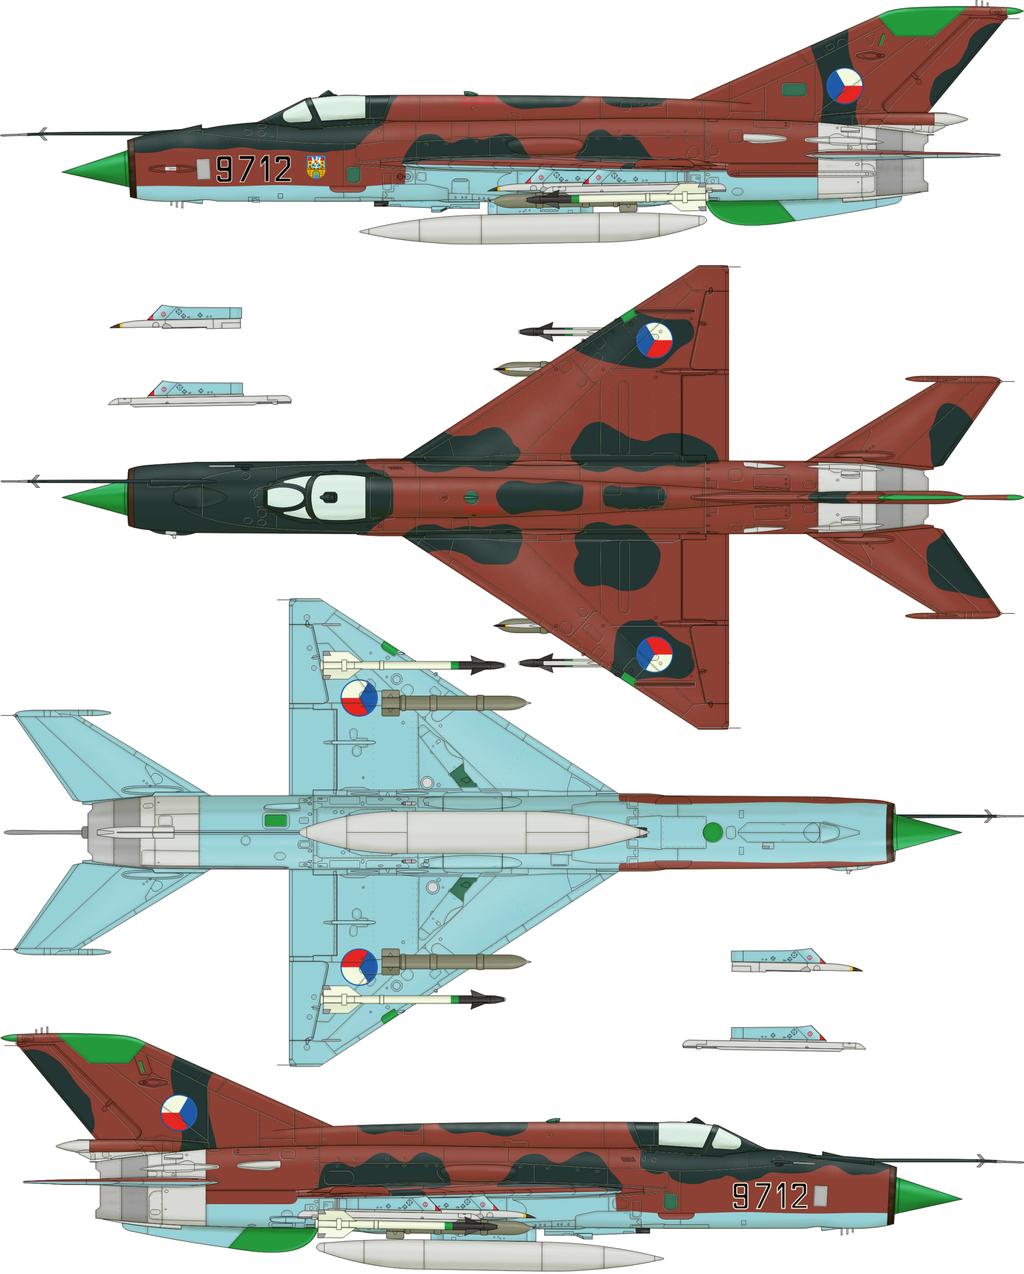 B MiG-21MF, th Czechoslovak People s Army, 9 Fighter Squadron, Bechyne AB, Czechoslovakia, 1989-199 This aircraft had the serial number 99712, and was built in 1974, and subsequently delivered to